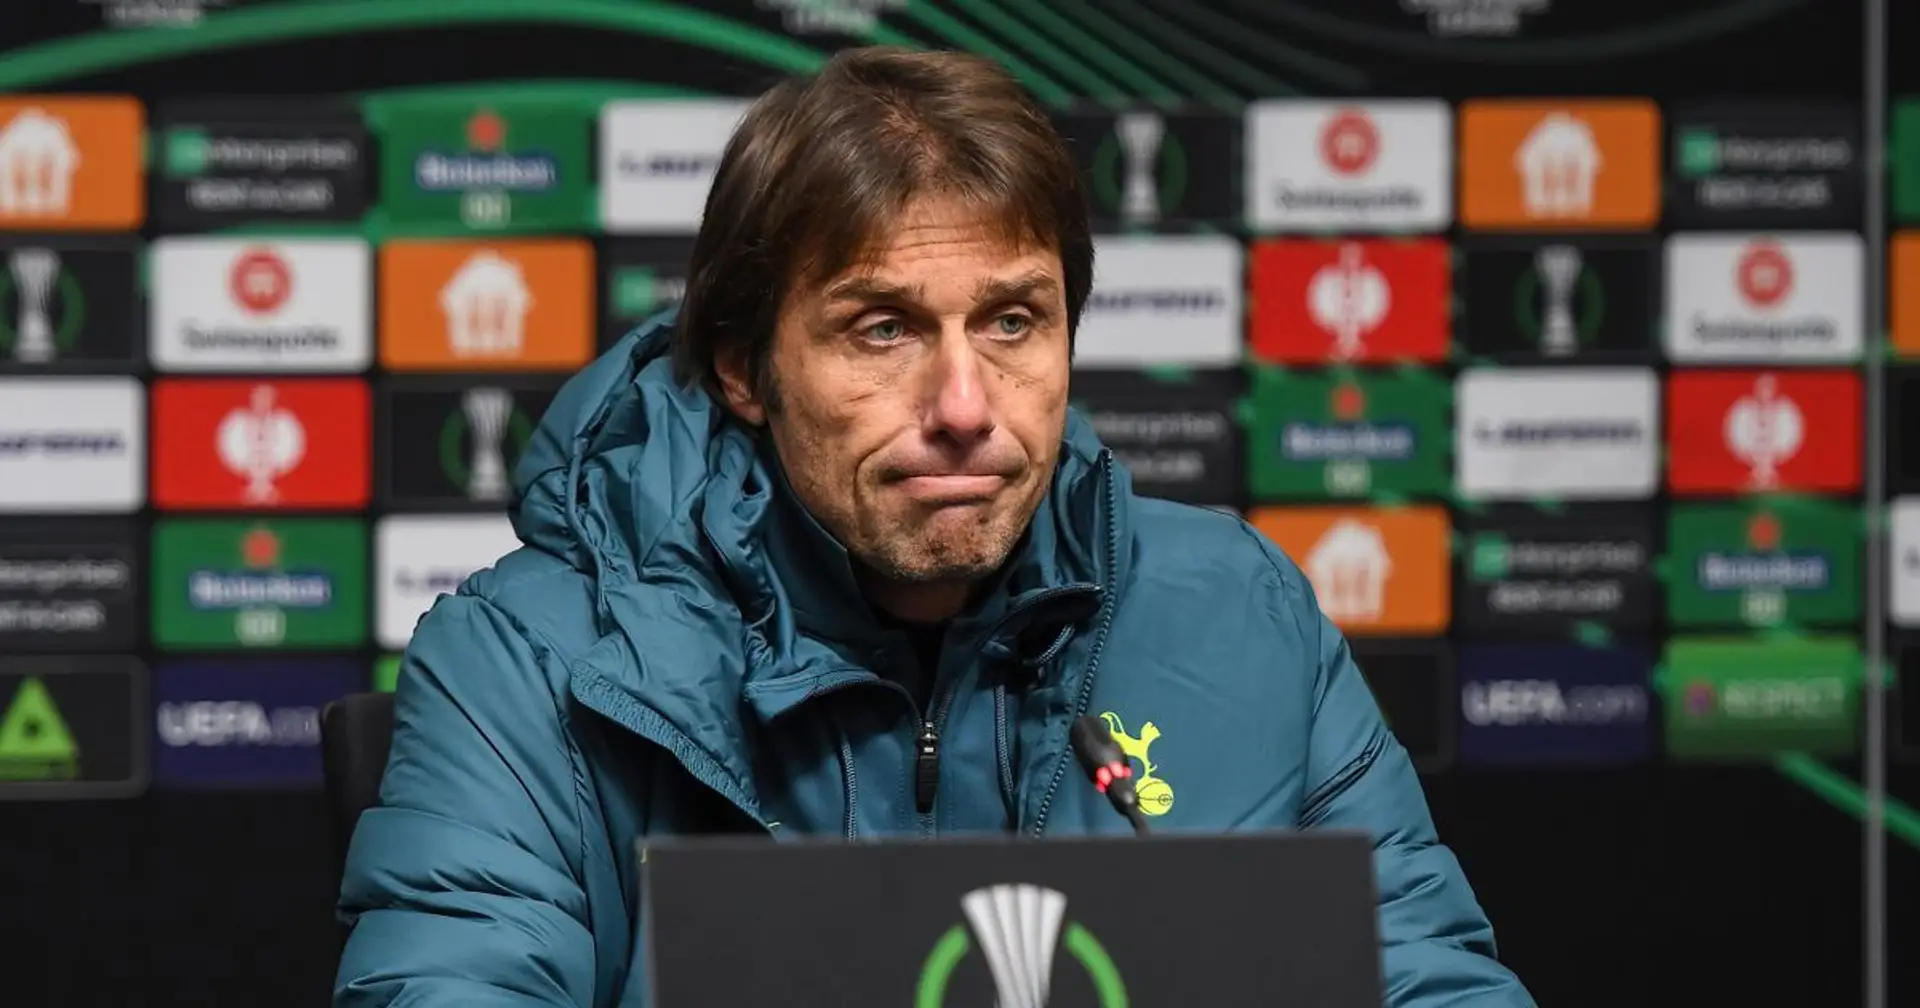 Antonio Conte 'scared' over Covid outbreak at Tottenham as 8 players test positive